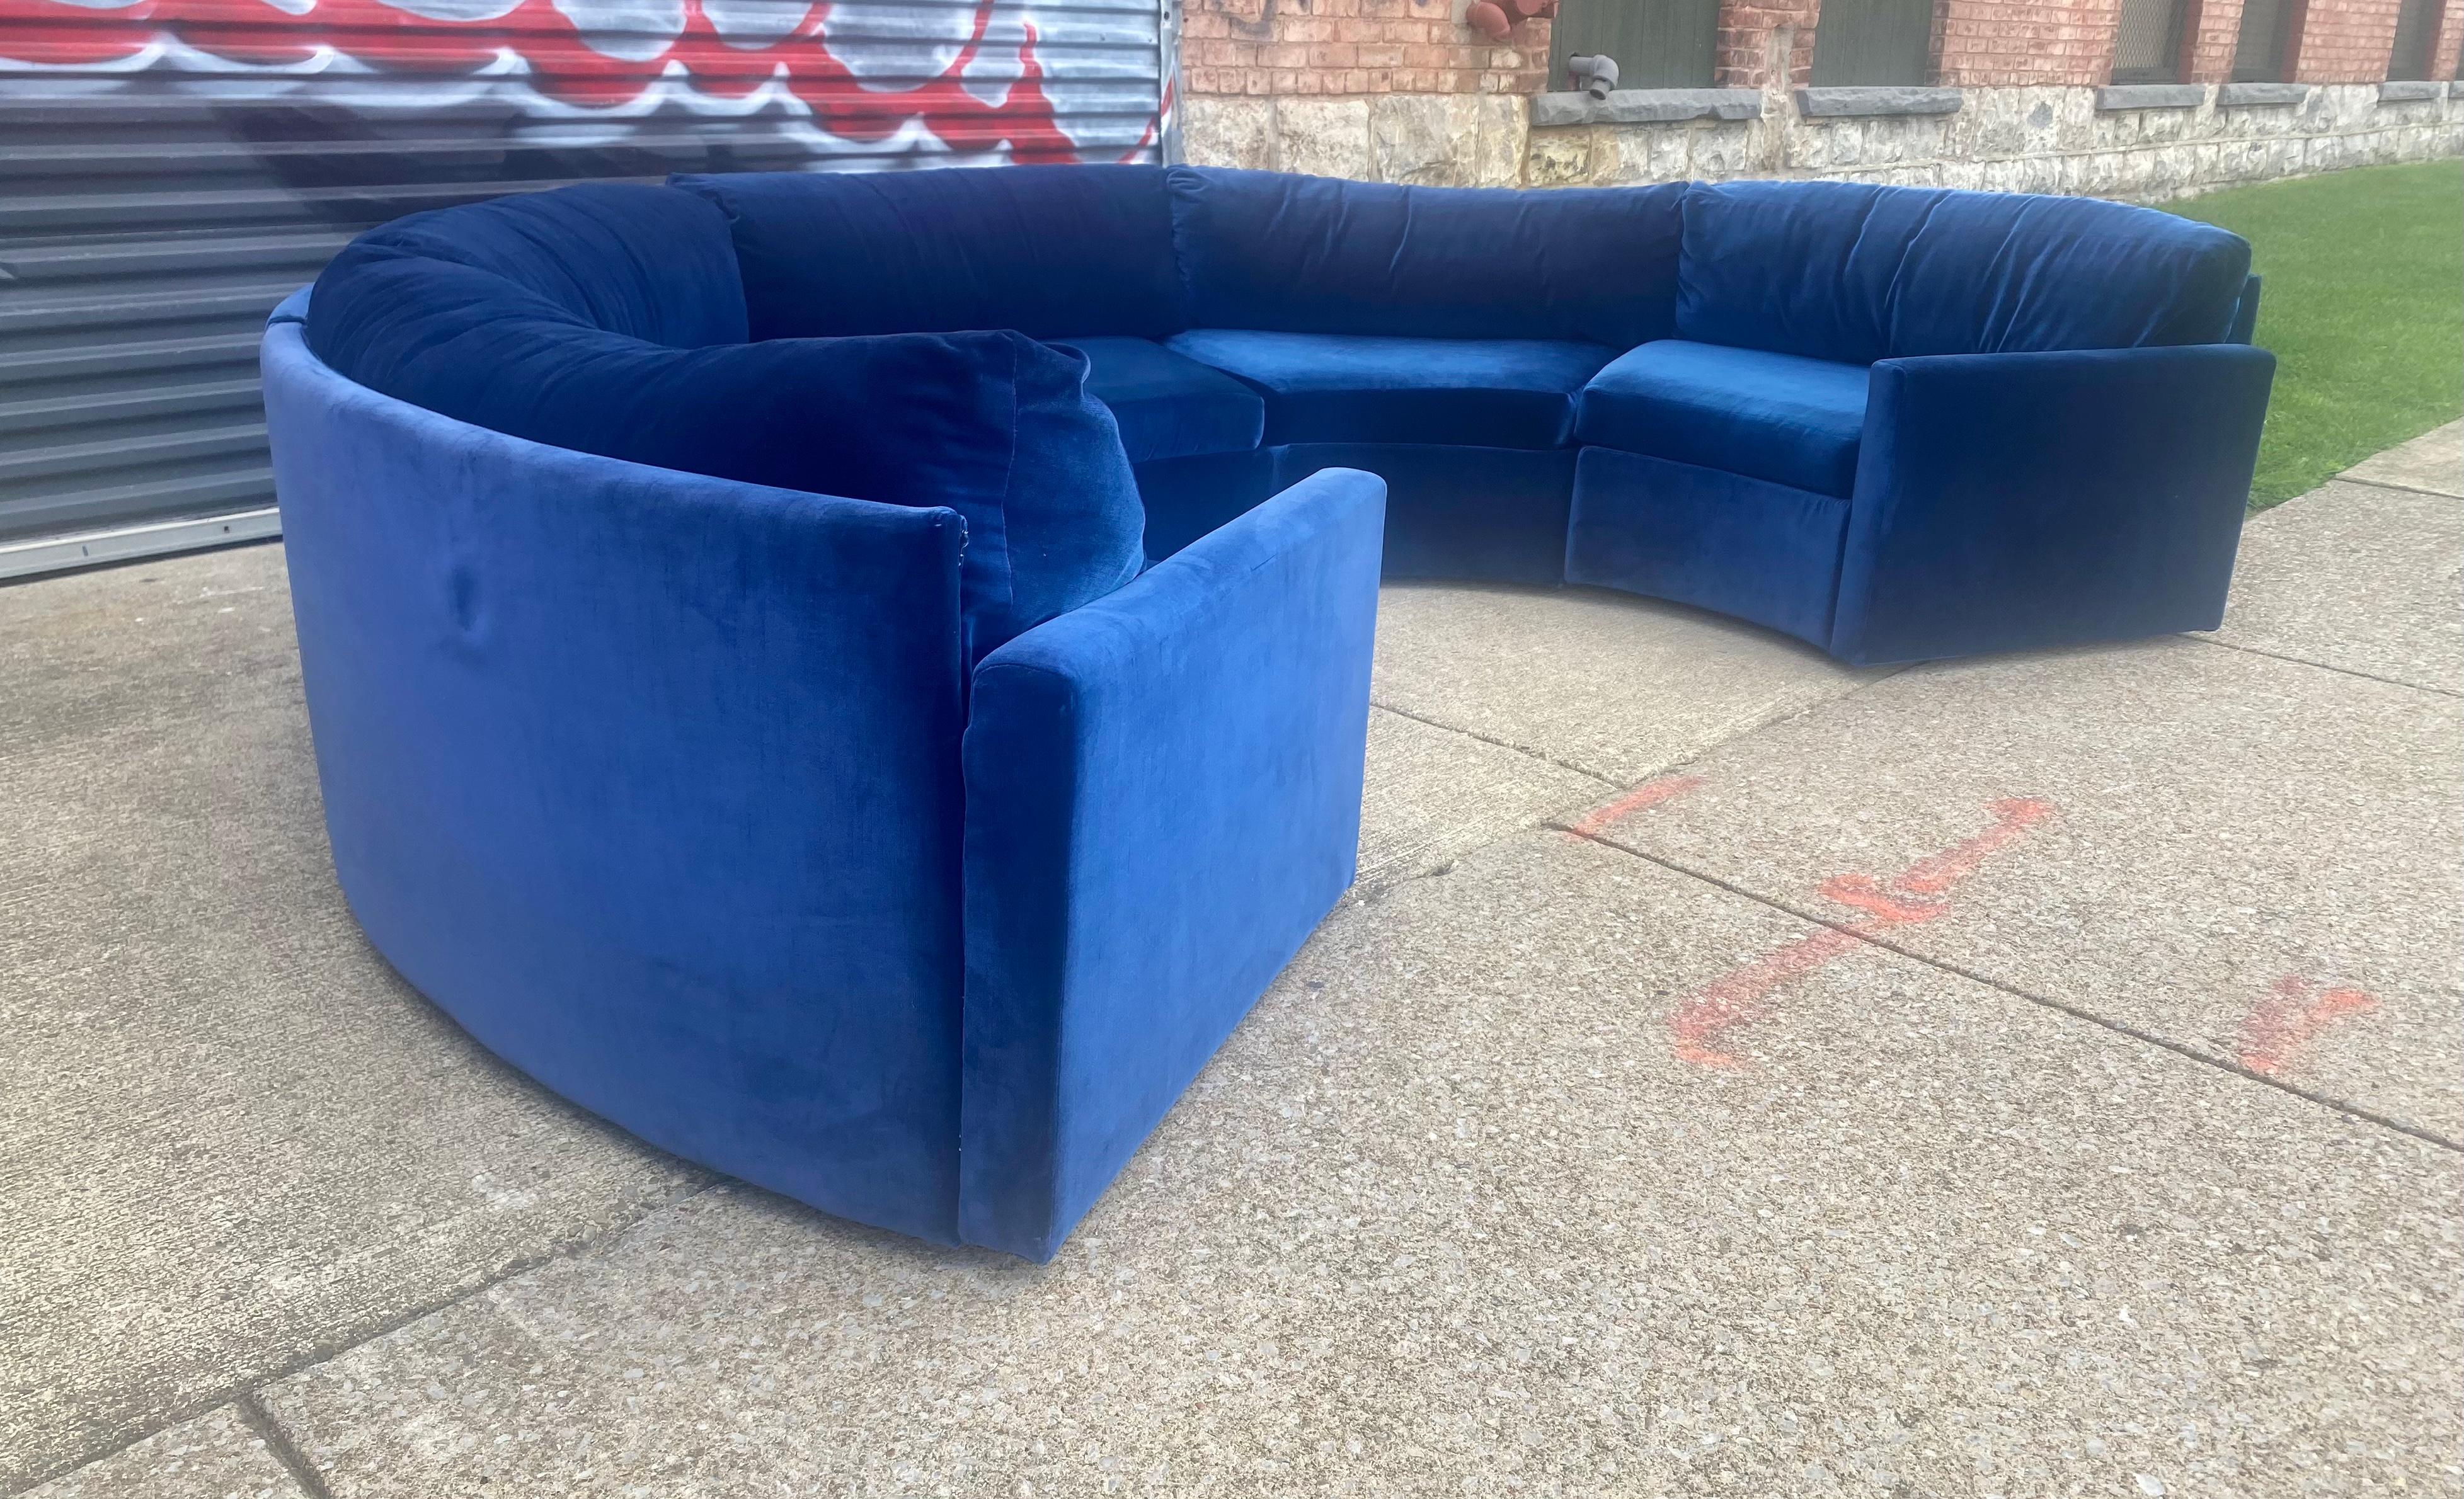 Stunning, classic 5-piece curved sectional sofa by Comfort Design Inc attributed to Milo Baughman,, Wonderful original condition,, Extremely comfortable,,,Hand delivery avail to New York City or anywhere en route from Buffalo NY.